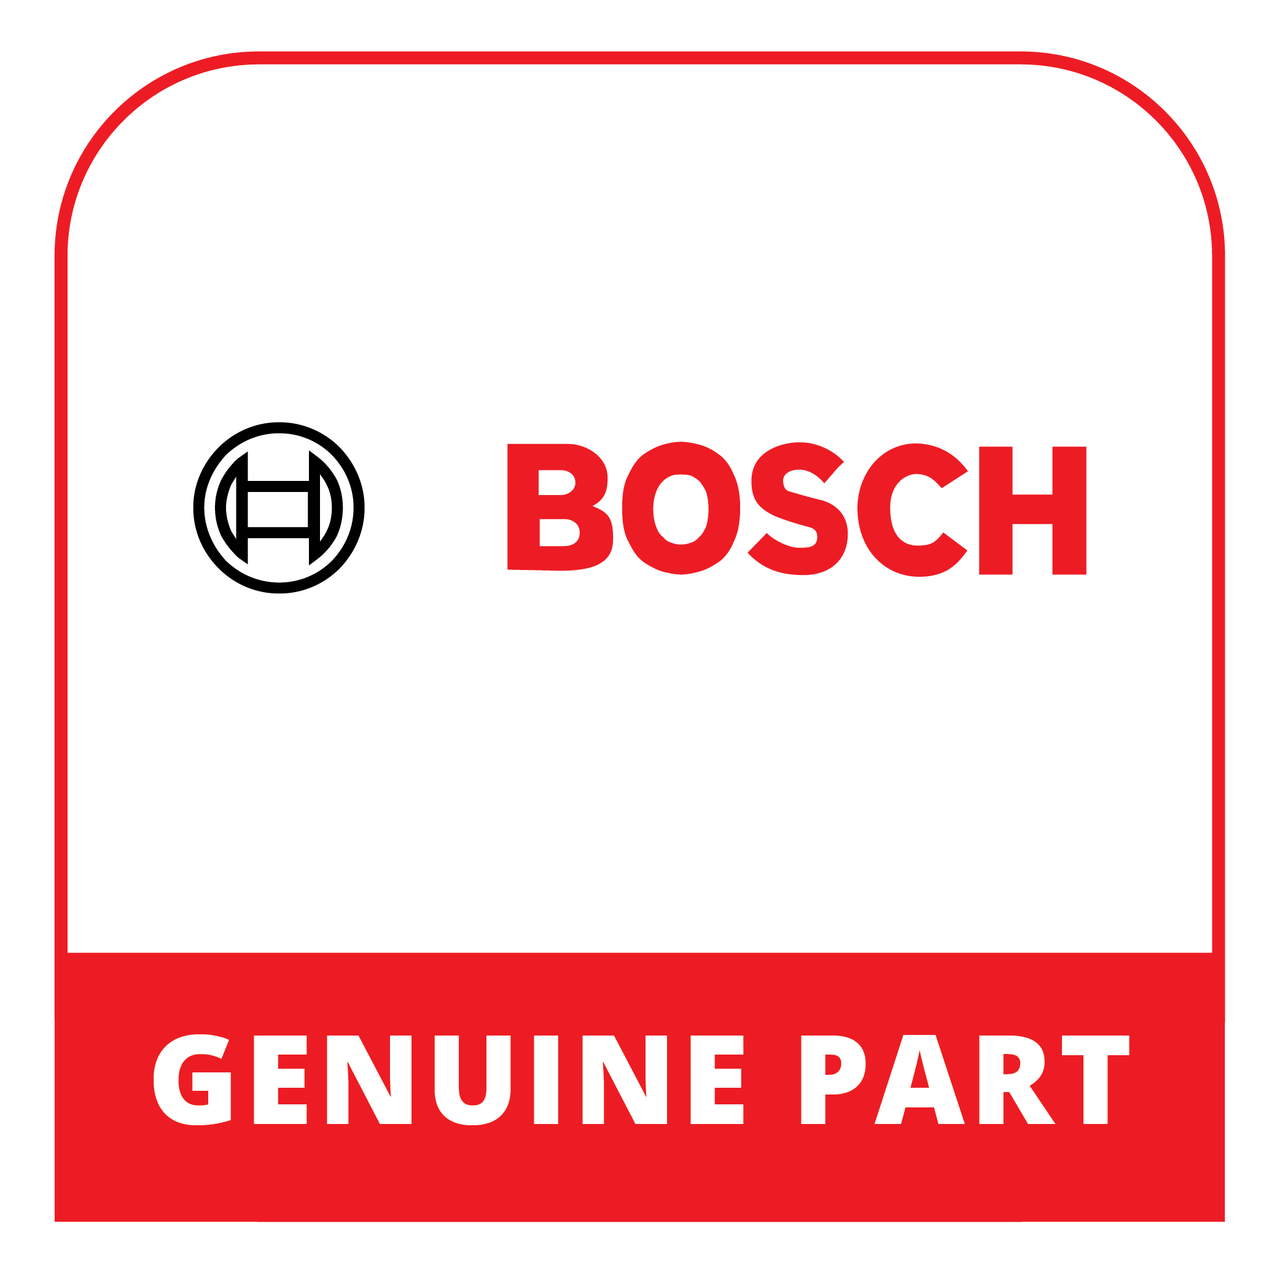 Bosch (Thermador) 12029596 - Cable Harness - Genuine Bosch (Thermador) Part